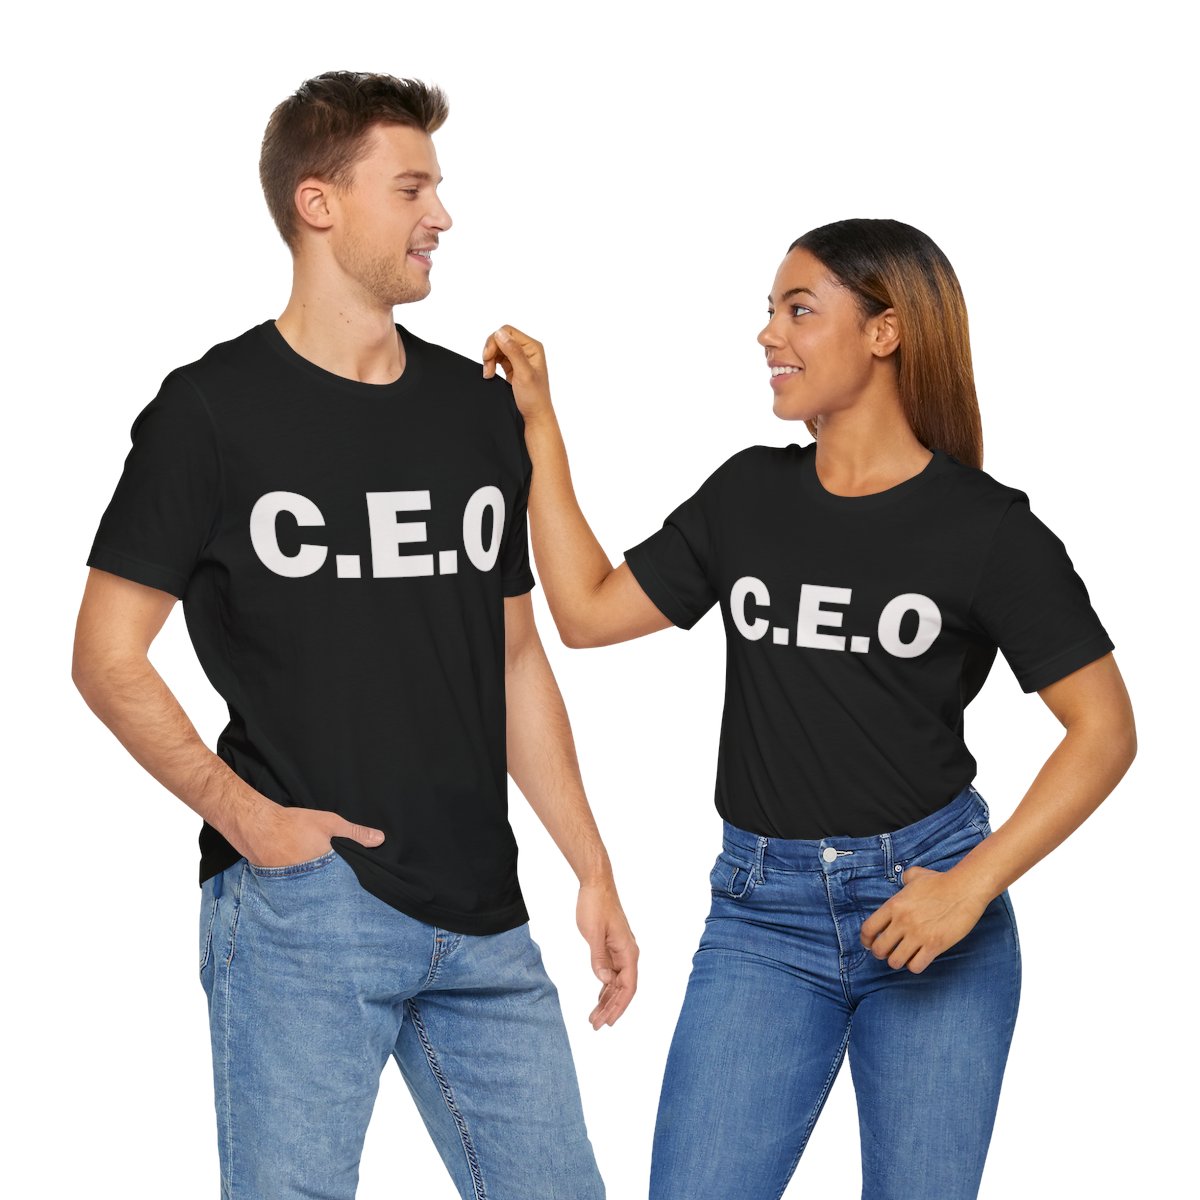 C.E.O. Inspiration Tee - Command Your Journey product thumbnail image